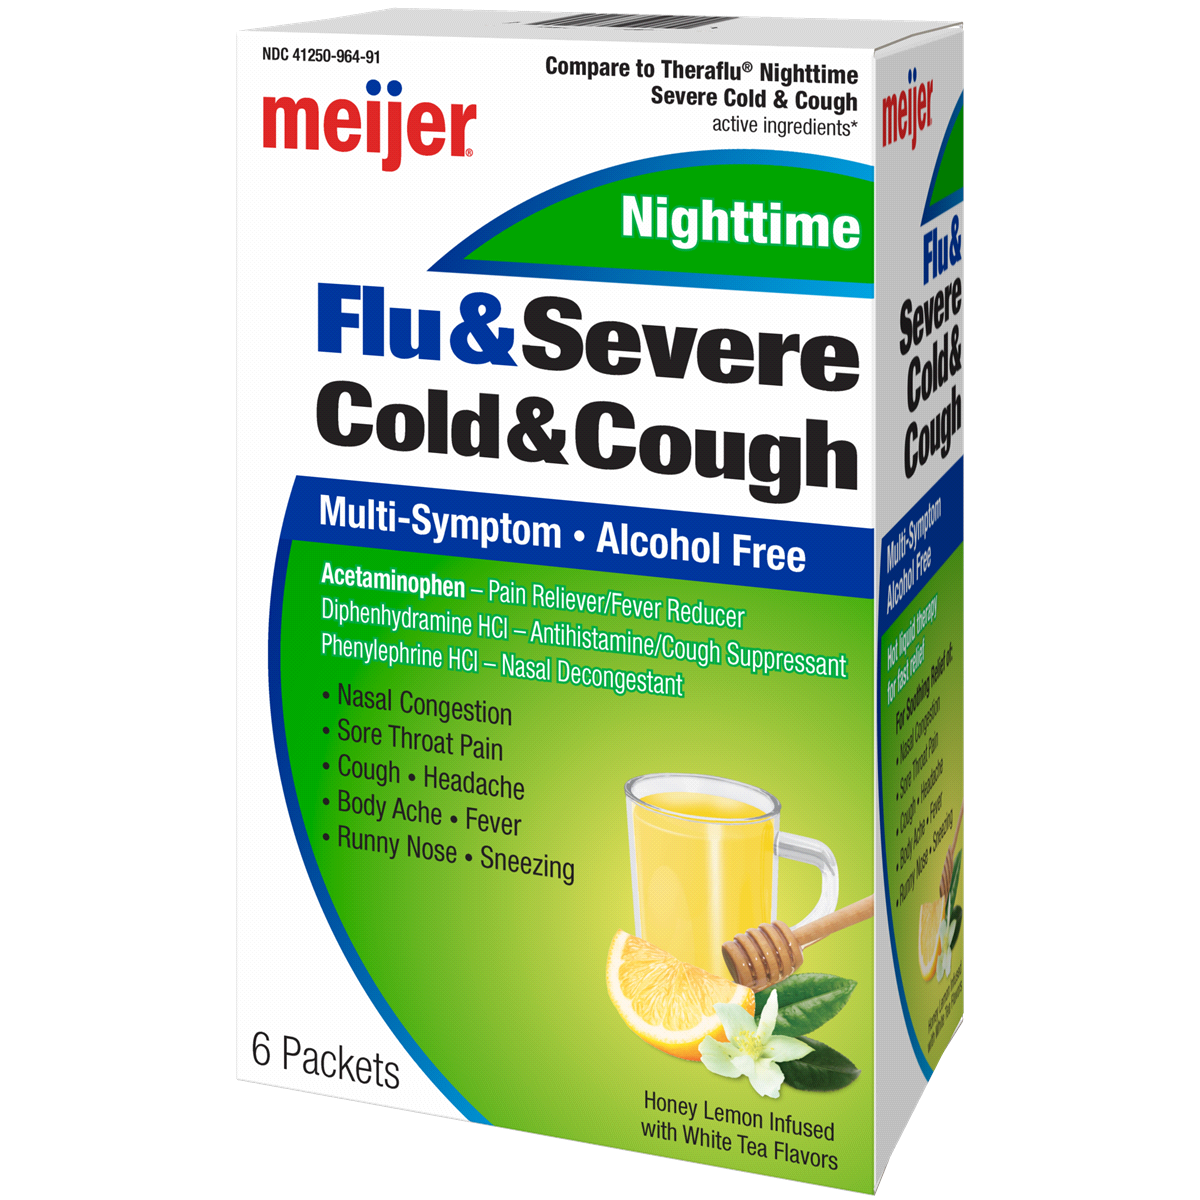 slide 2 of 3, Meijer Nighttime Severe Cold, Flu and Cough, Pain Reliever/Fever Reducer, Nasal Decongestant, Cough Suppressant, Antihistamine, Hot Liquid Therapy for Fast Relief, 6 ct